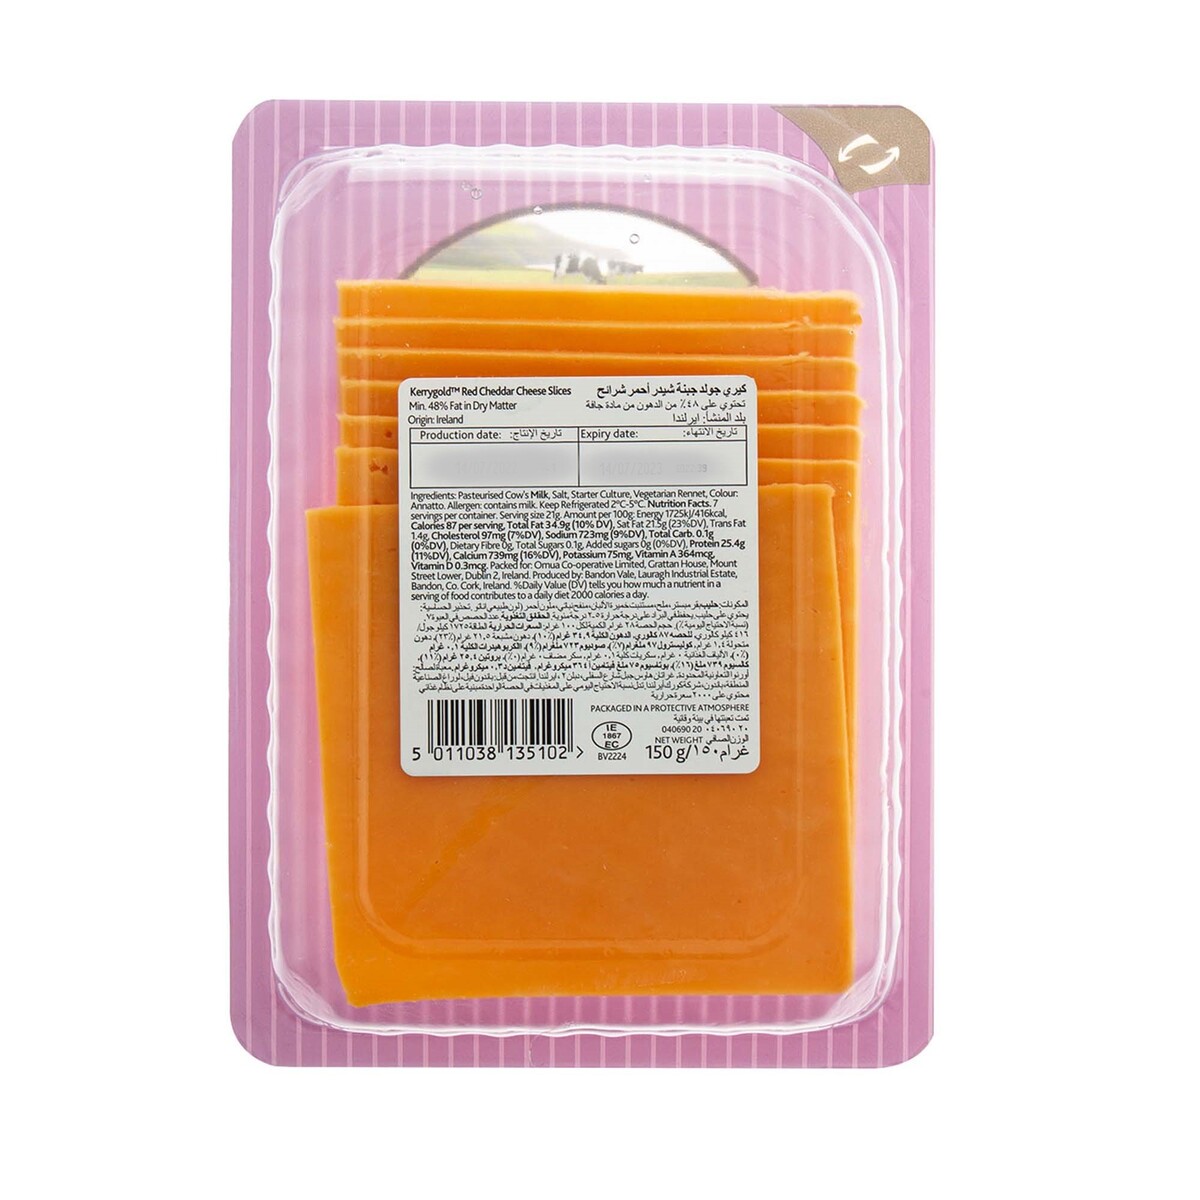 Kerry Gold Red Cheddar Mild Cheese 150g